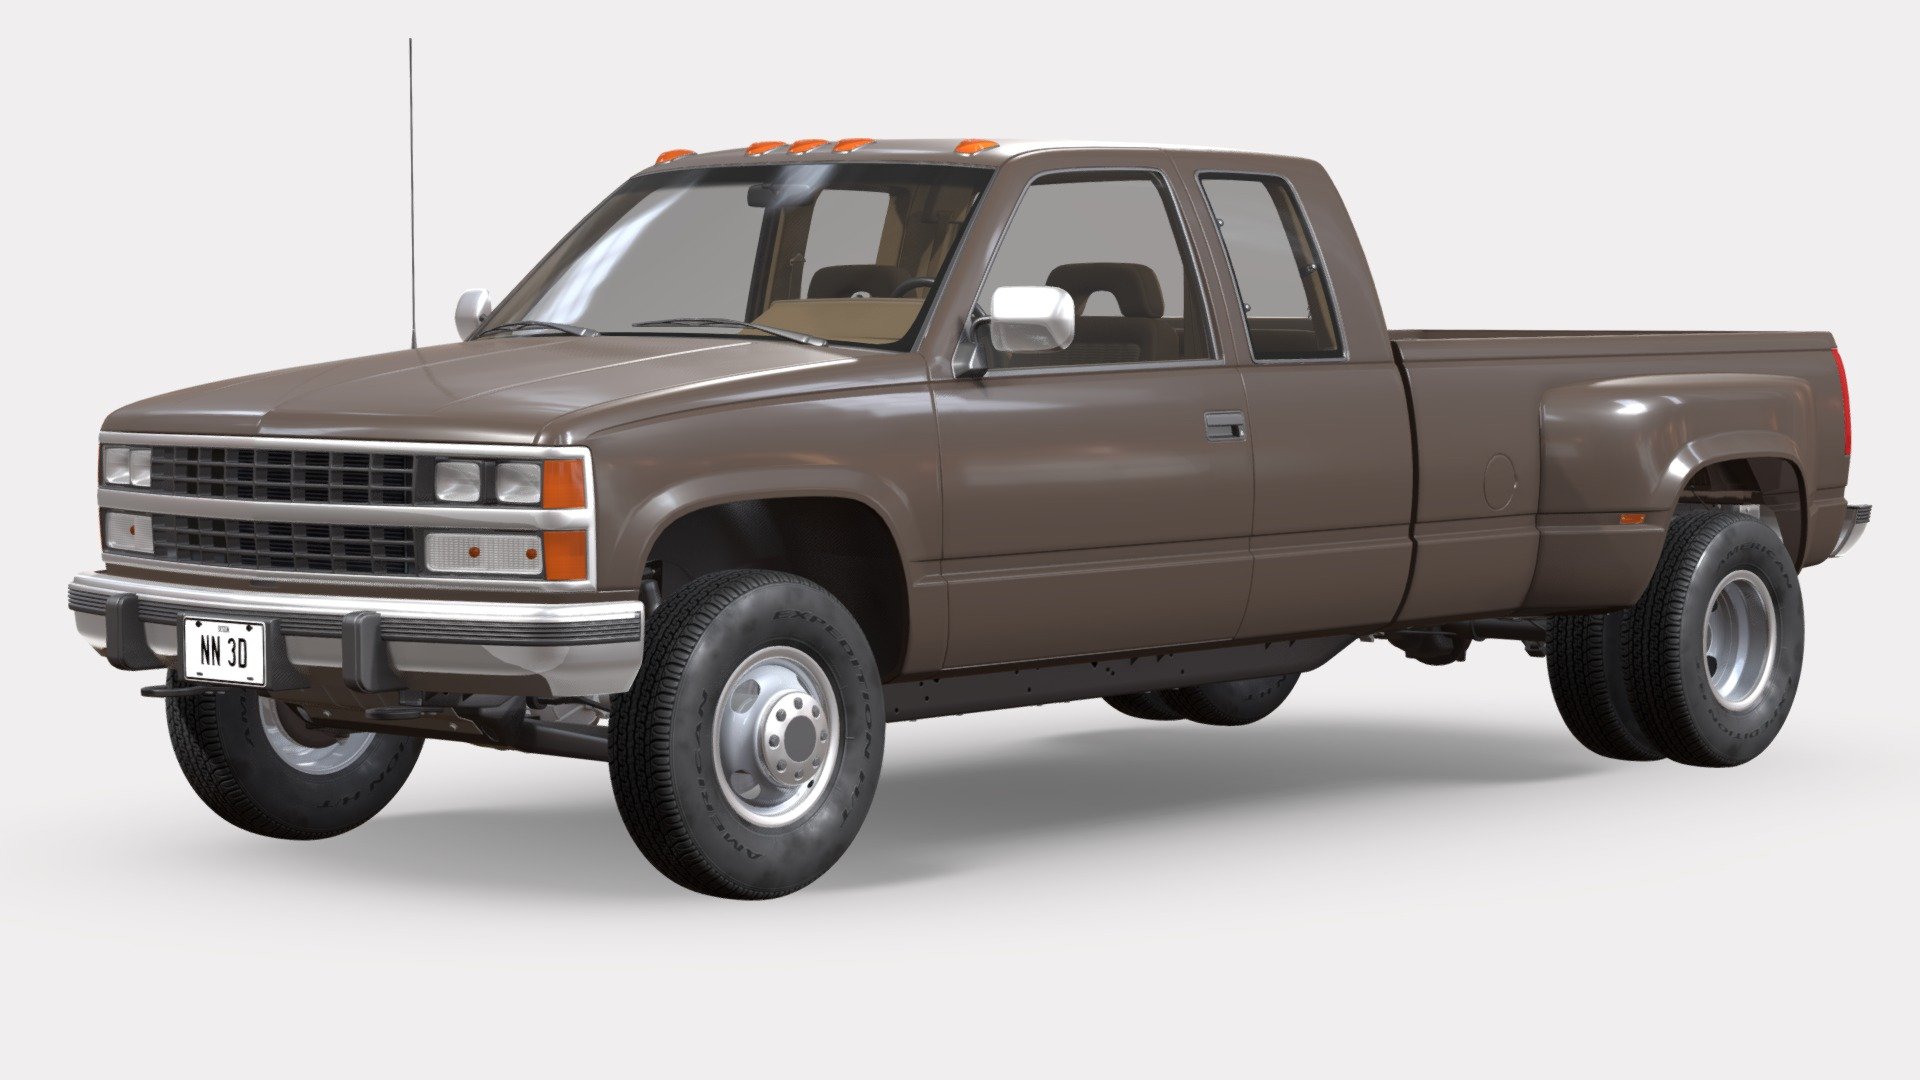 NN 3D store.

3D model of a modern extended cab dually pickup truck.

The truck's high detail exterior and interior are great for close up renders and the undercarriage has enough visible parts for close range shots.

The model was created with 3DS Max 2016 using the open subdivision modifier which has been left in the stack to adjust the level of detail.

There are also included HI and LO poly versions in Blender format with textures.

Exchange files included: FBX and OBJ with HI and LO poly versions, 3DS only with LO poly version.

SPECIFICATIONS:

The model has 180.000 polygons with subdivision level at 0 and 720.000 at level 1.

All textures are included and mapped in all files but they will render like the preview images only in 3DSMax with V-Ray, the rest of the files might have to be adjusted depending on the software you are using.

Textures are in PNG and JPG format with 4096x4096, 2048x2048 and 1024x1024 resolution 3d model